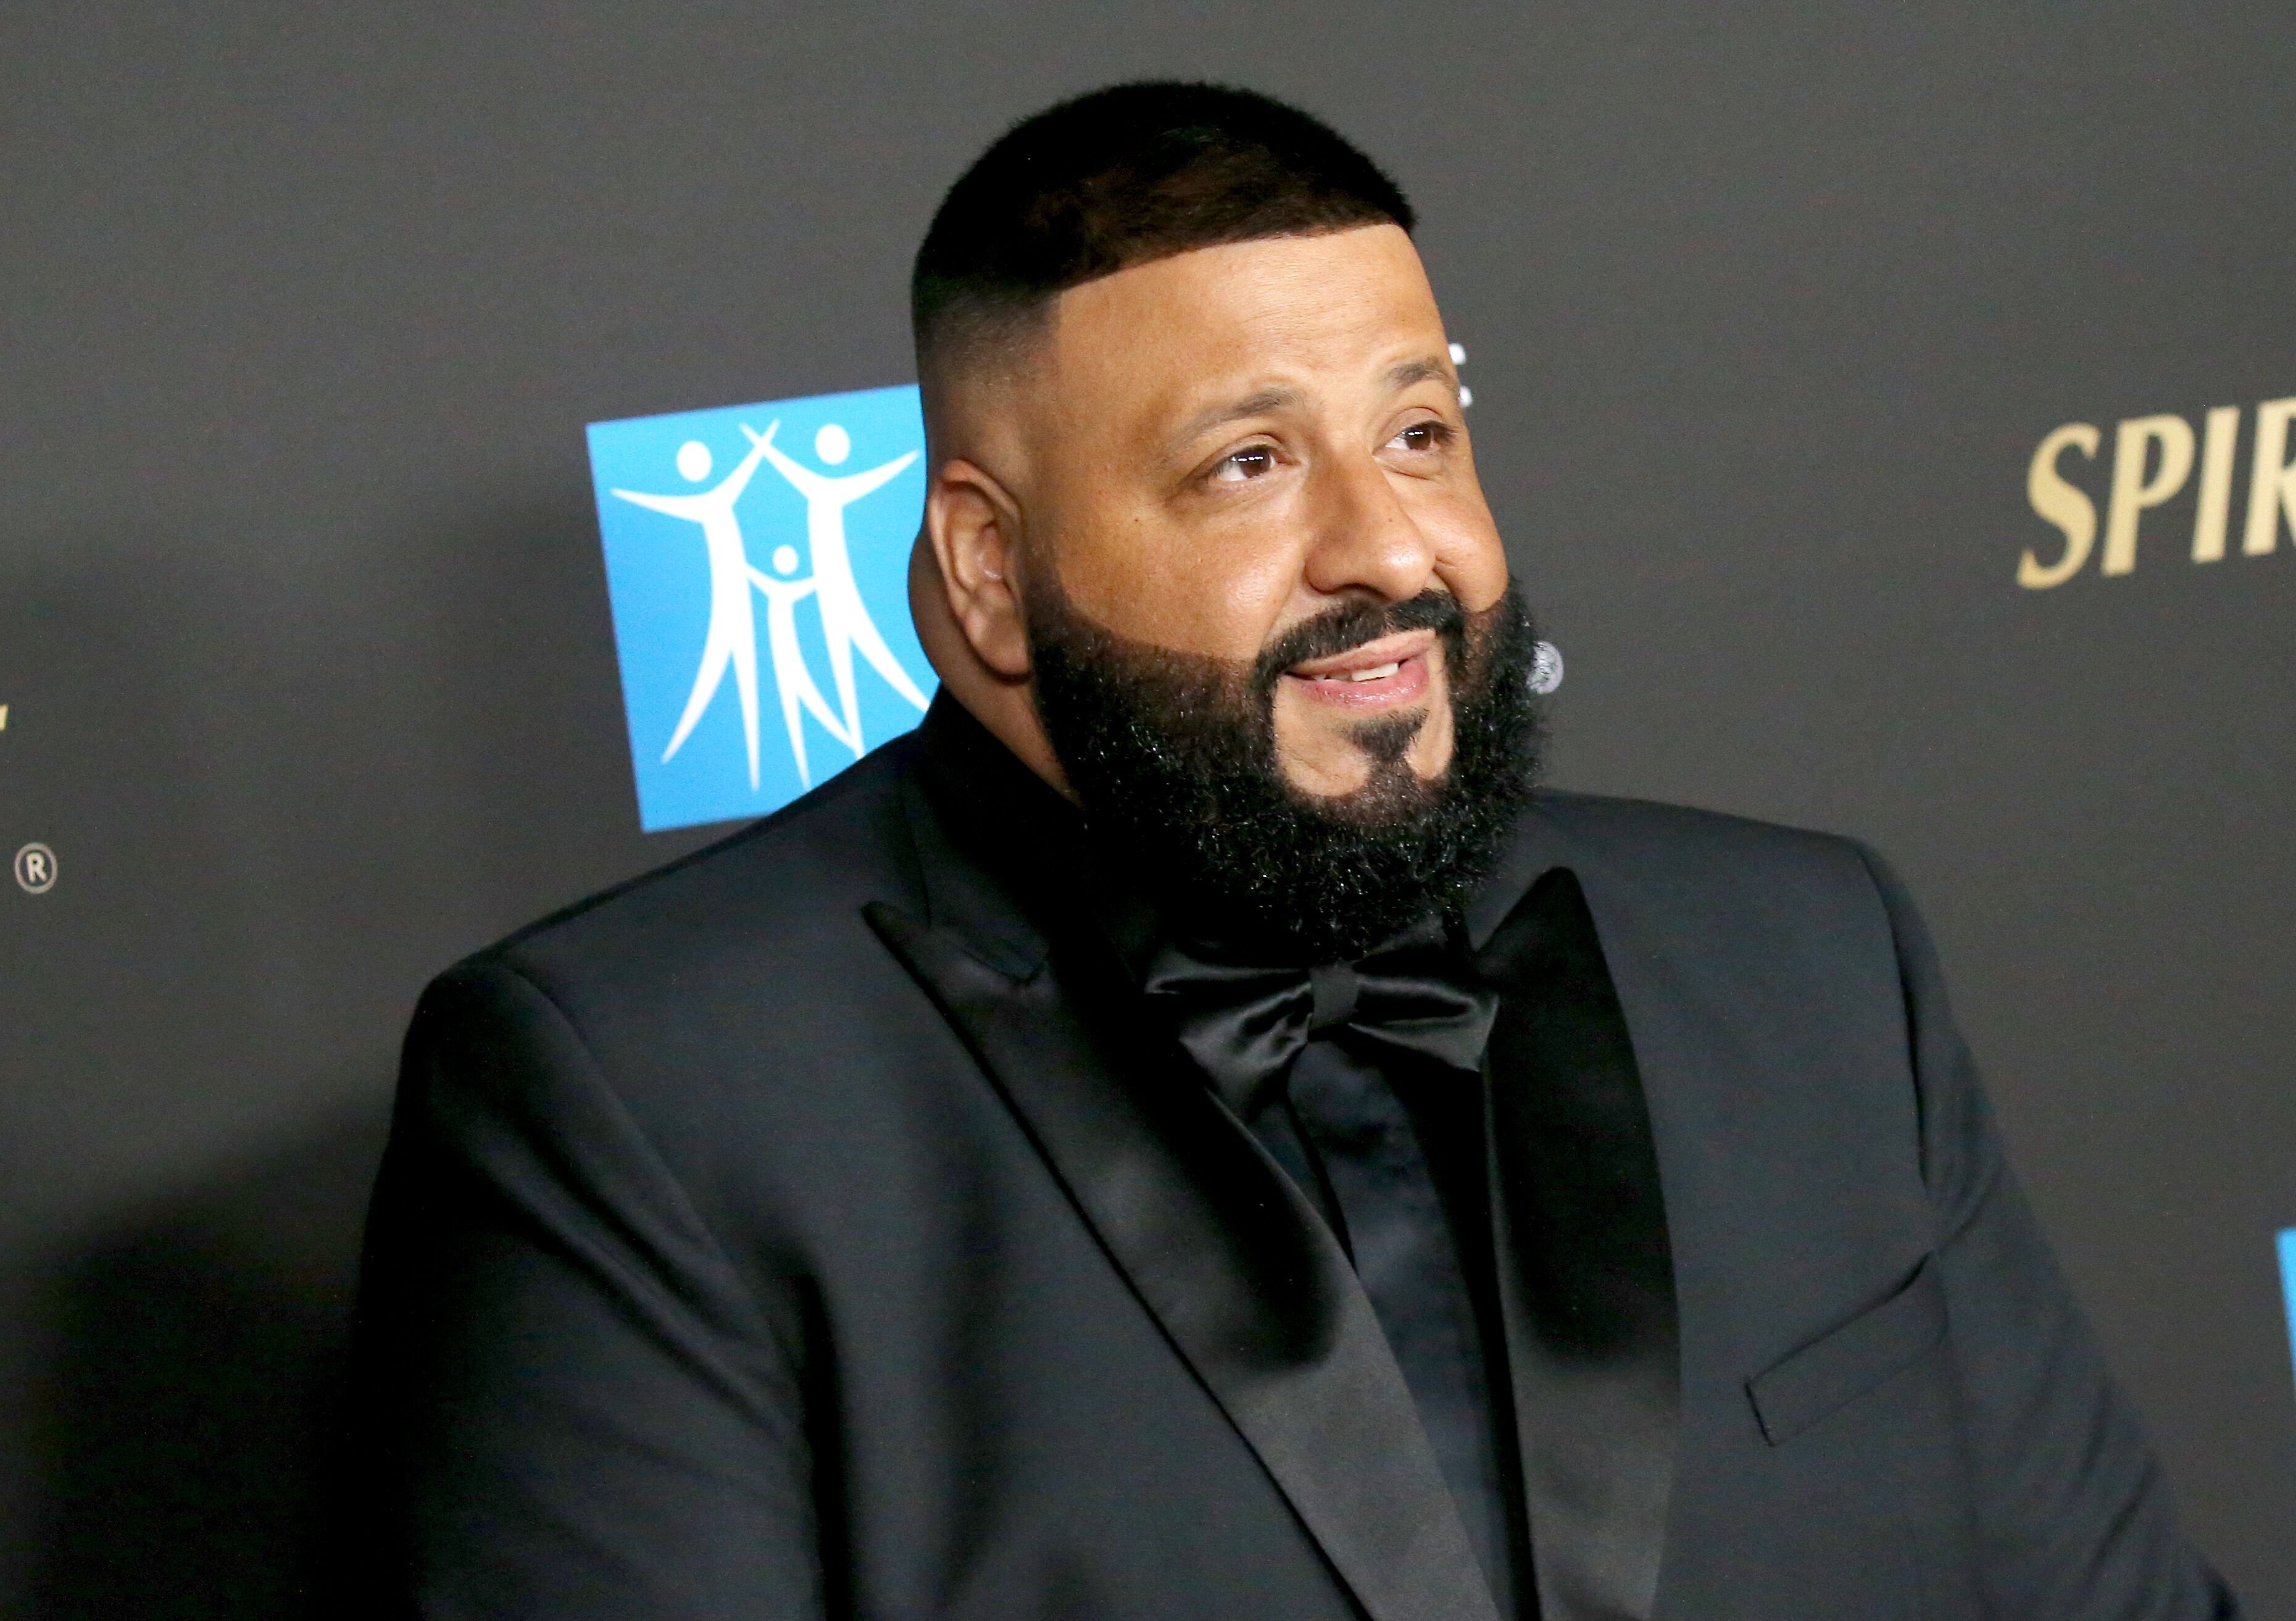 DJ Khaled at the City Of Hope's "Spirit of Life" gala in October 2019. | Source: Getty Images